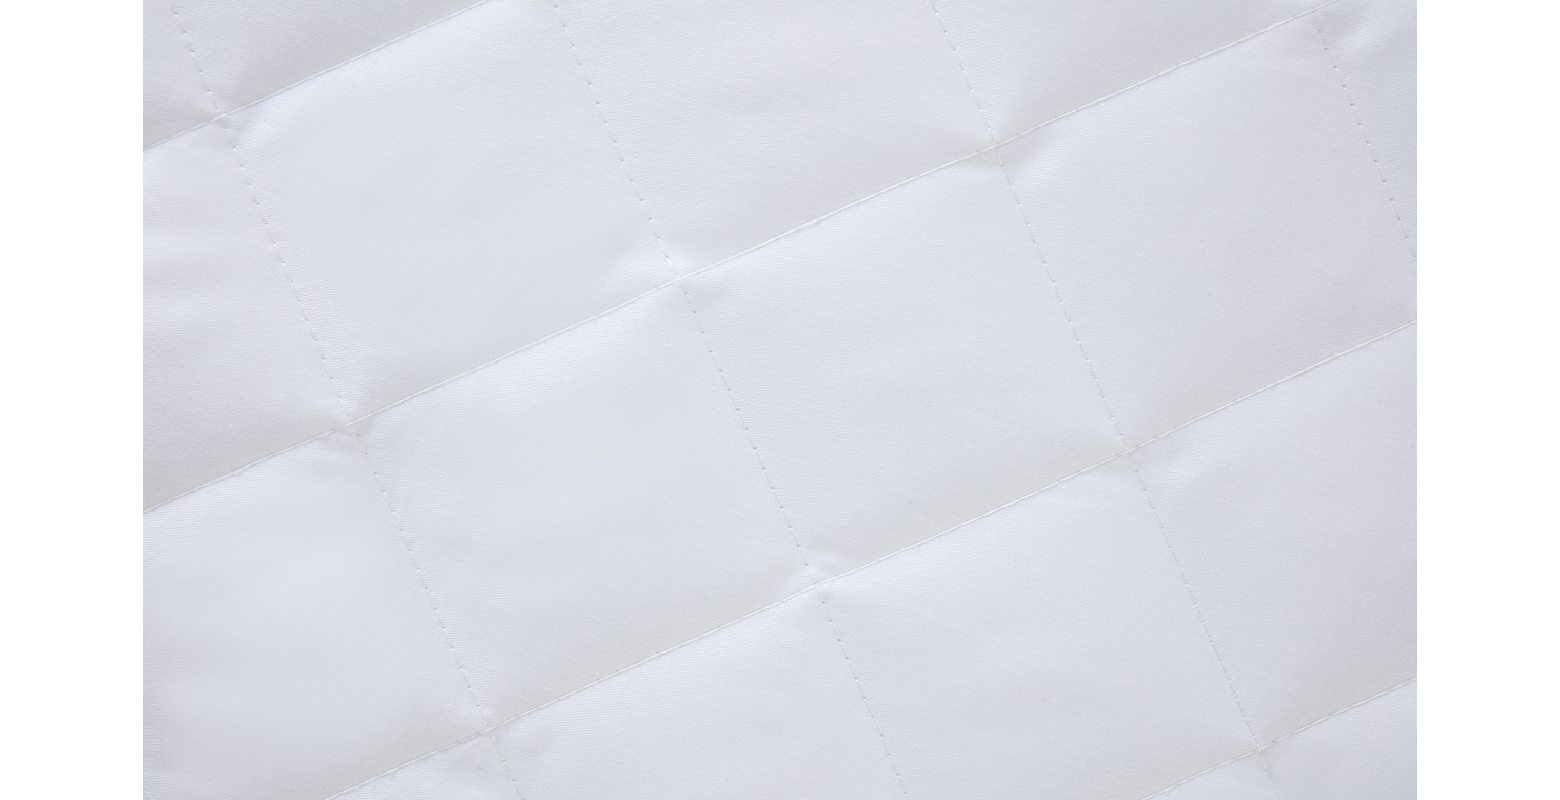 Clair De Lune Anti Allergy Quilted Mattress Protector Cotbed